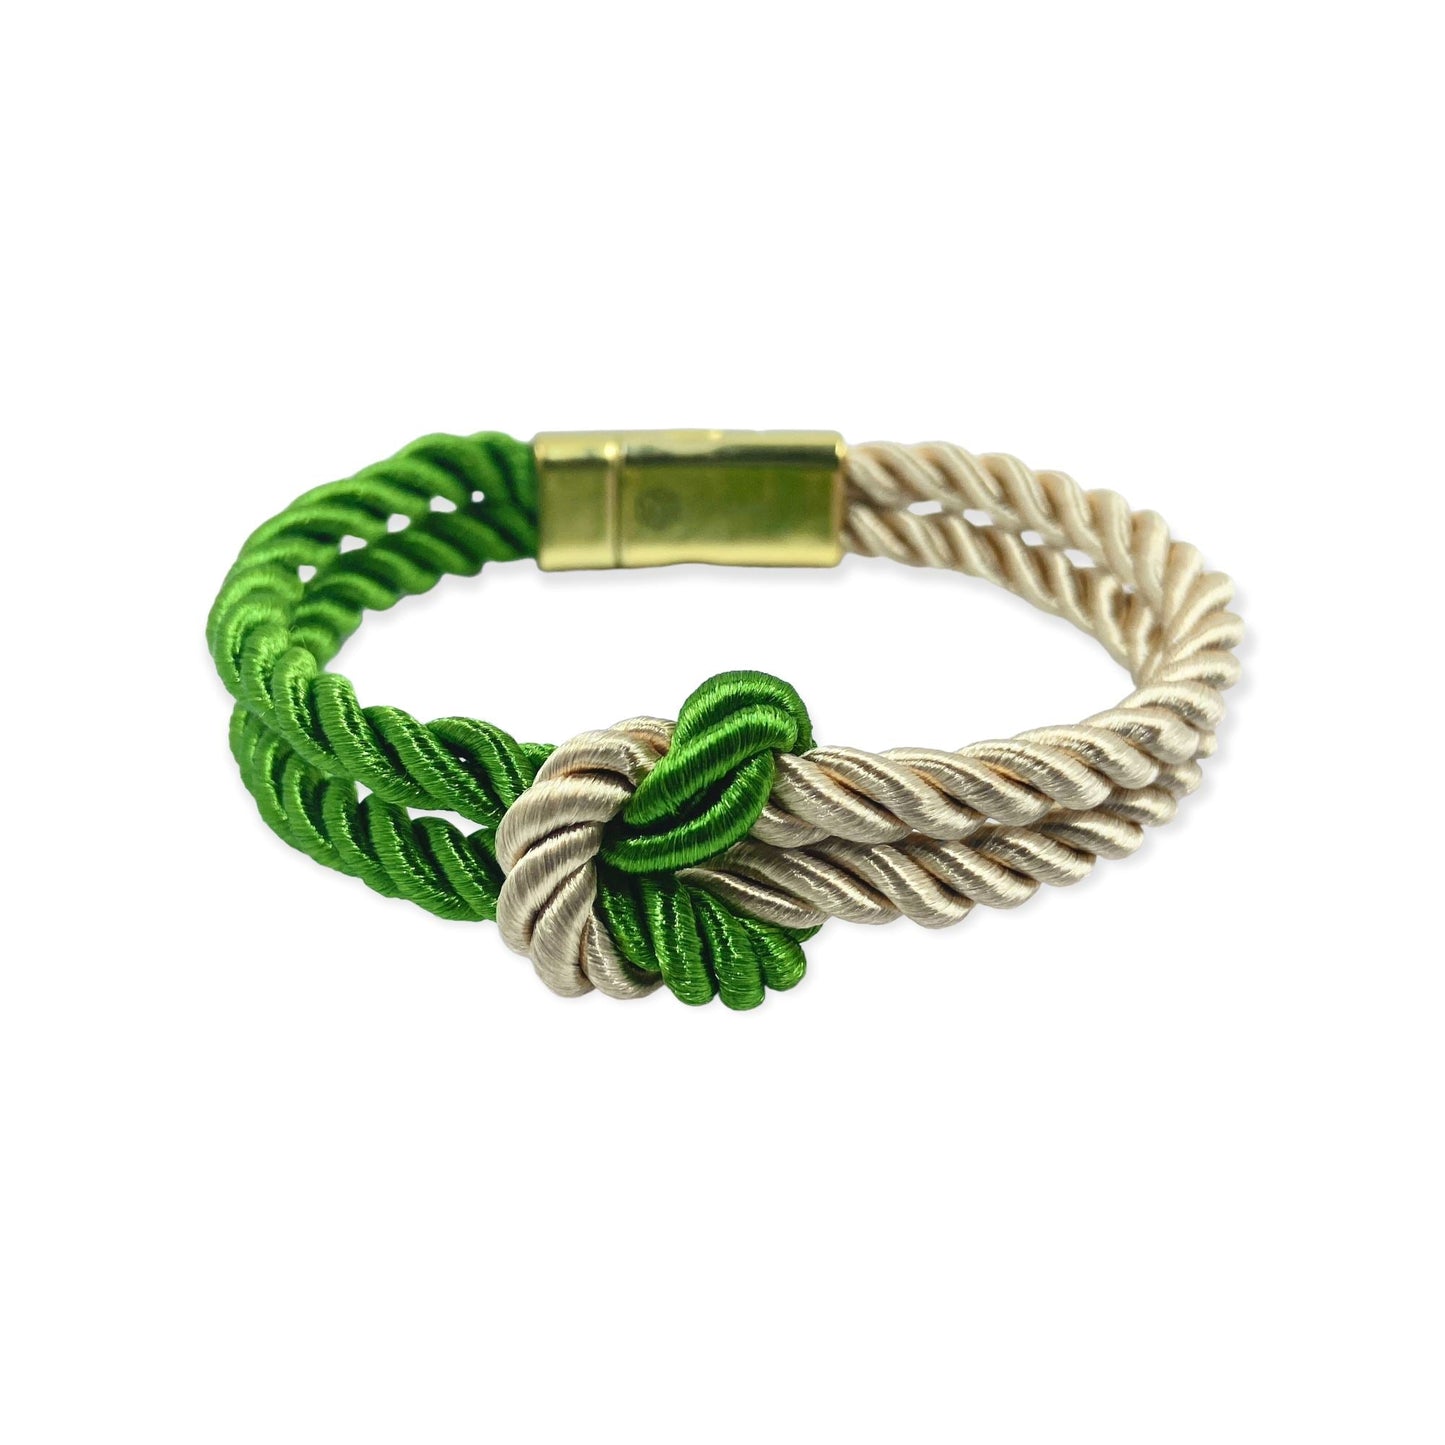 The Original Love Knot Satin Rope Bracelet- Old Gold and Green Bracelets Trendzio Old gold and Green 